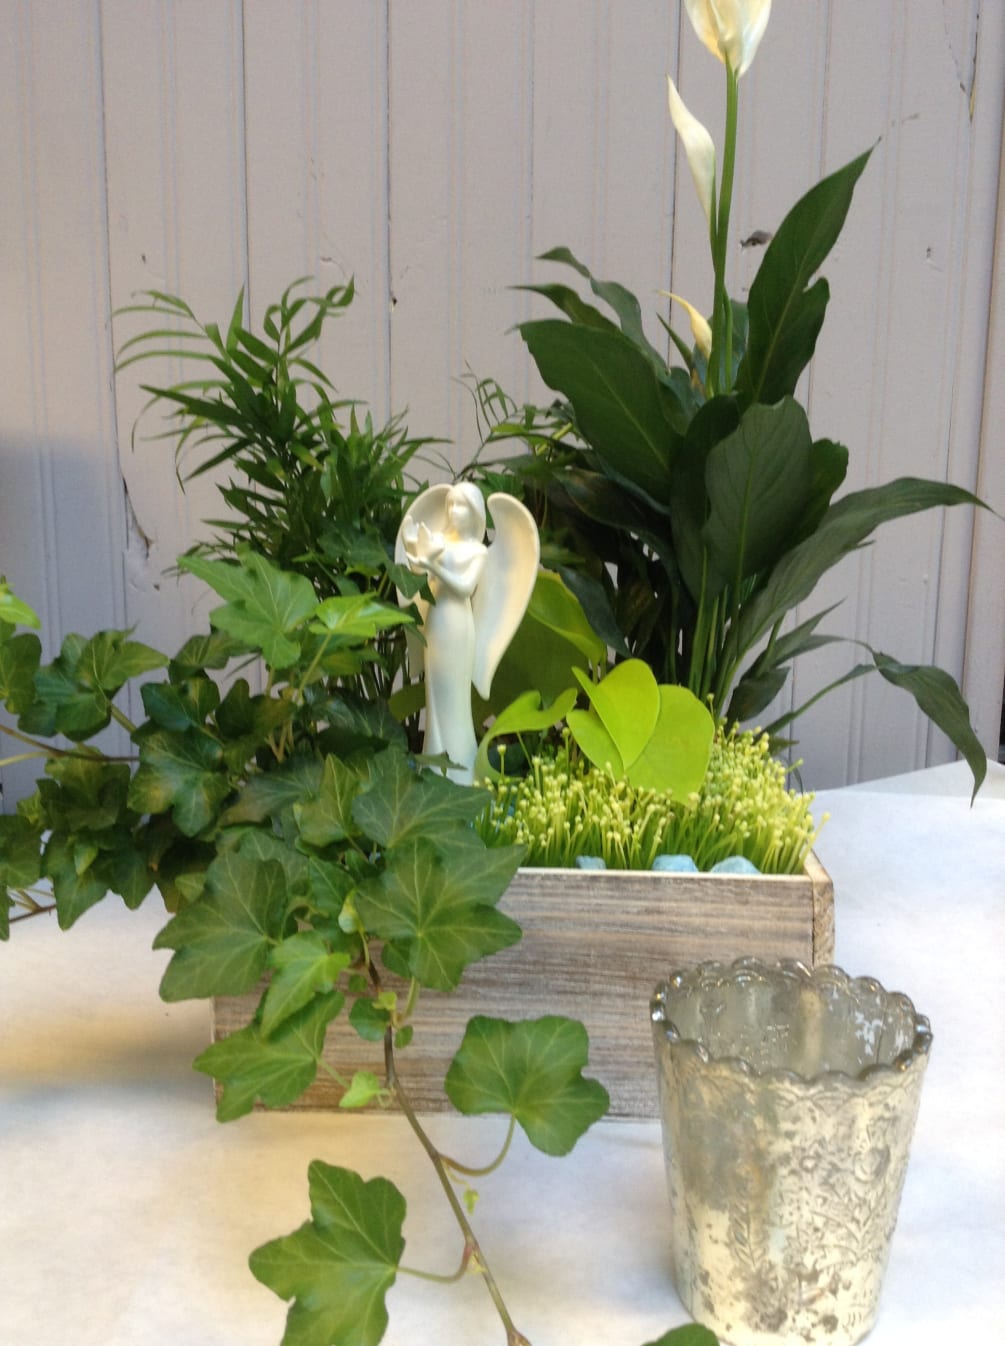 Wooden planter box with green plants and a white ceramic angel with